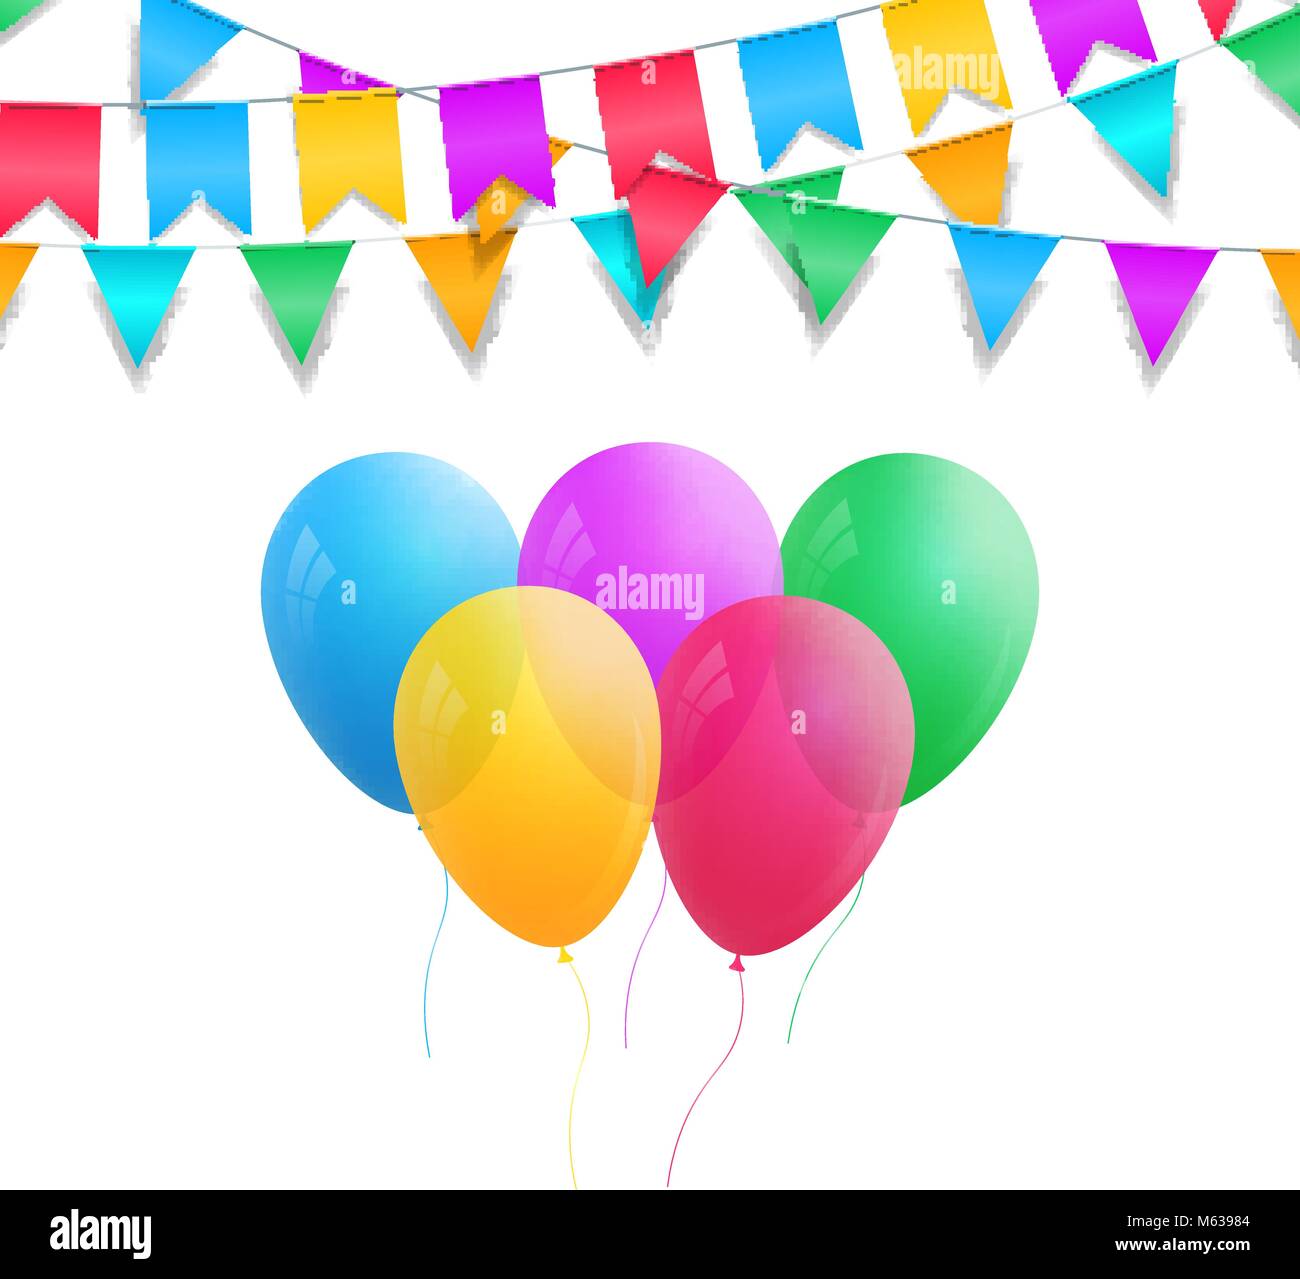 Row Colorful Balloons String Cord Isolated White Background Stock Photo by  ©stockfoto-graf 172886720